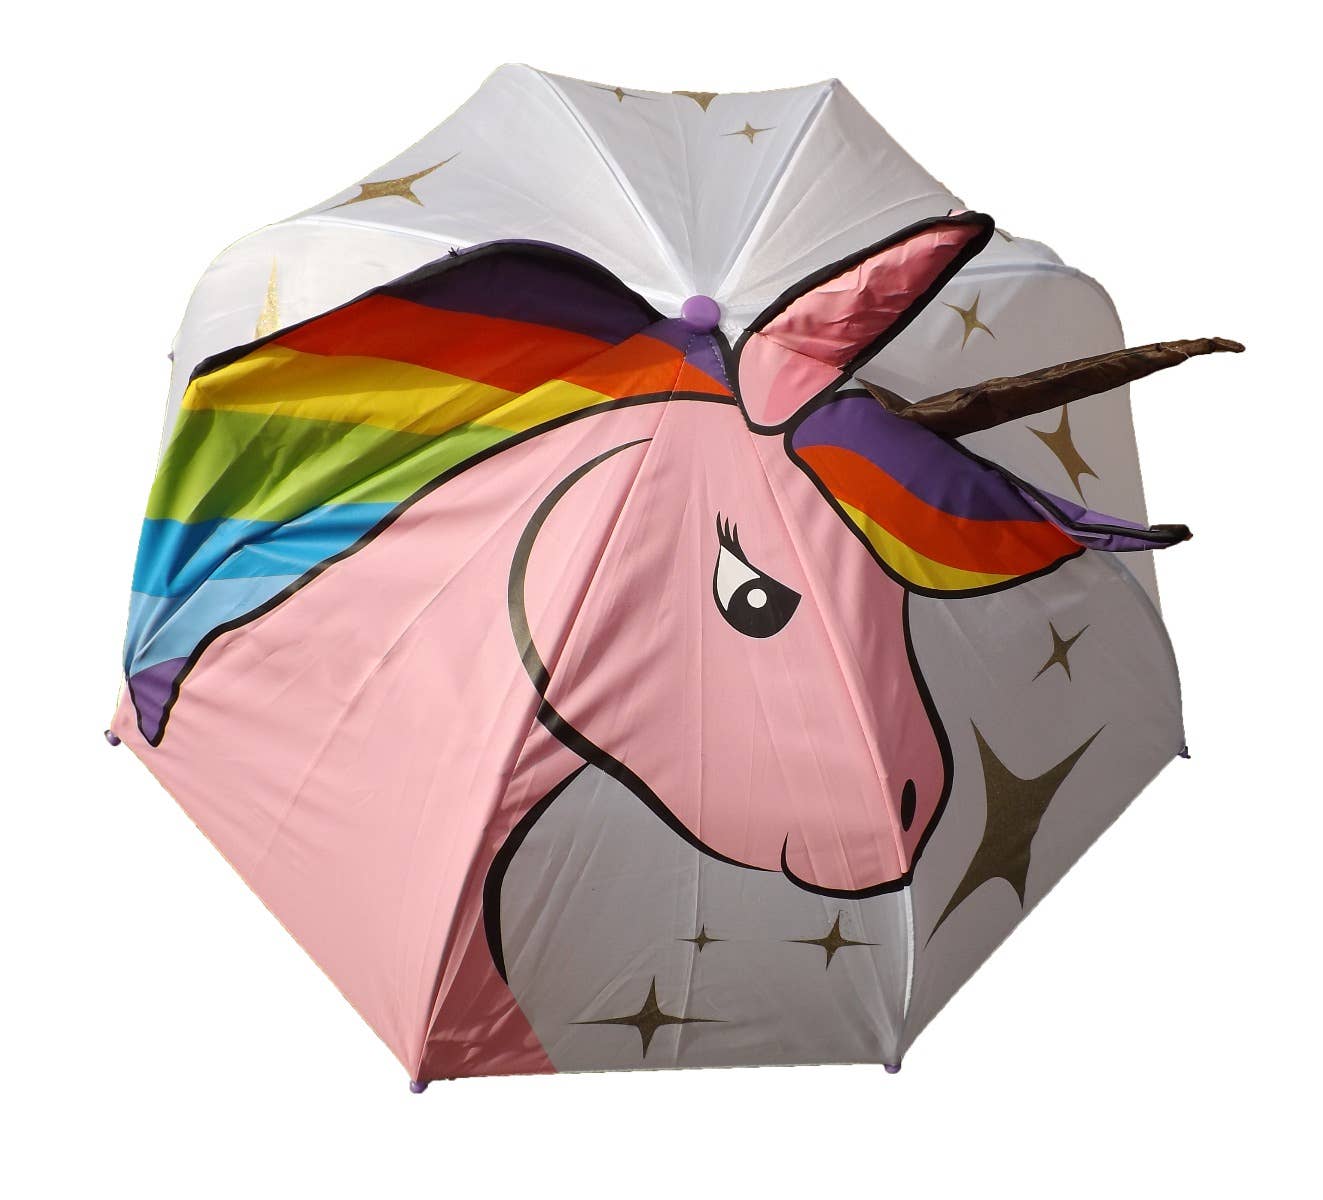 Unicorn Umbrella for Kids from the Soake Kids collection